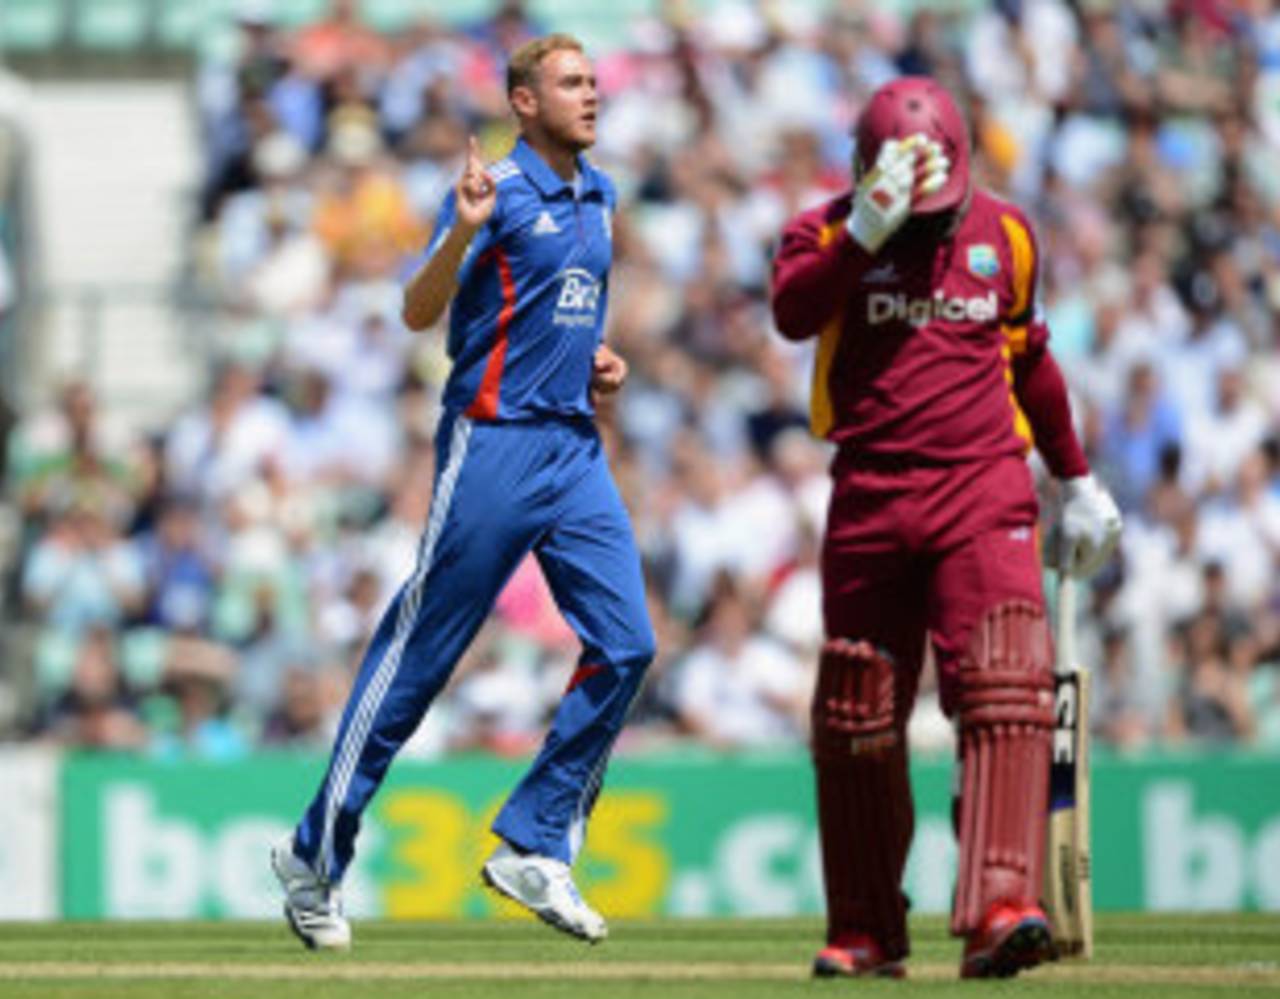 Stuart Broad had Dwayne Smith caught behind for a duck, England v West Indies, 2nd ODI, The Oval, June 19, 2012